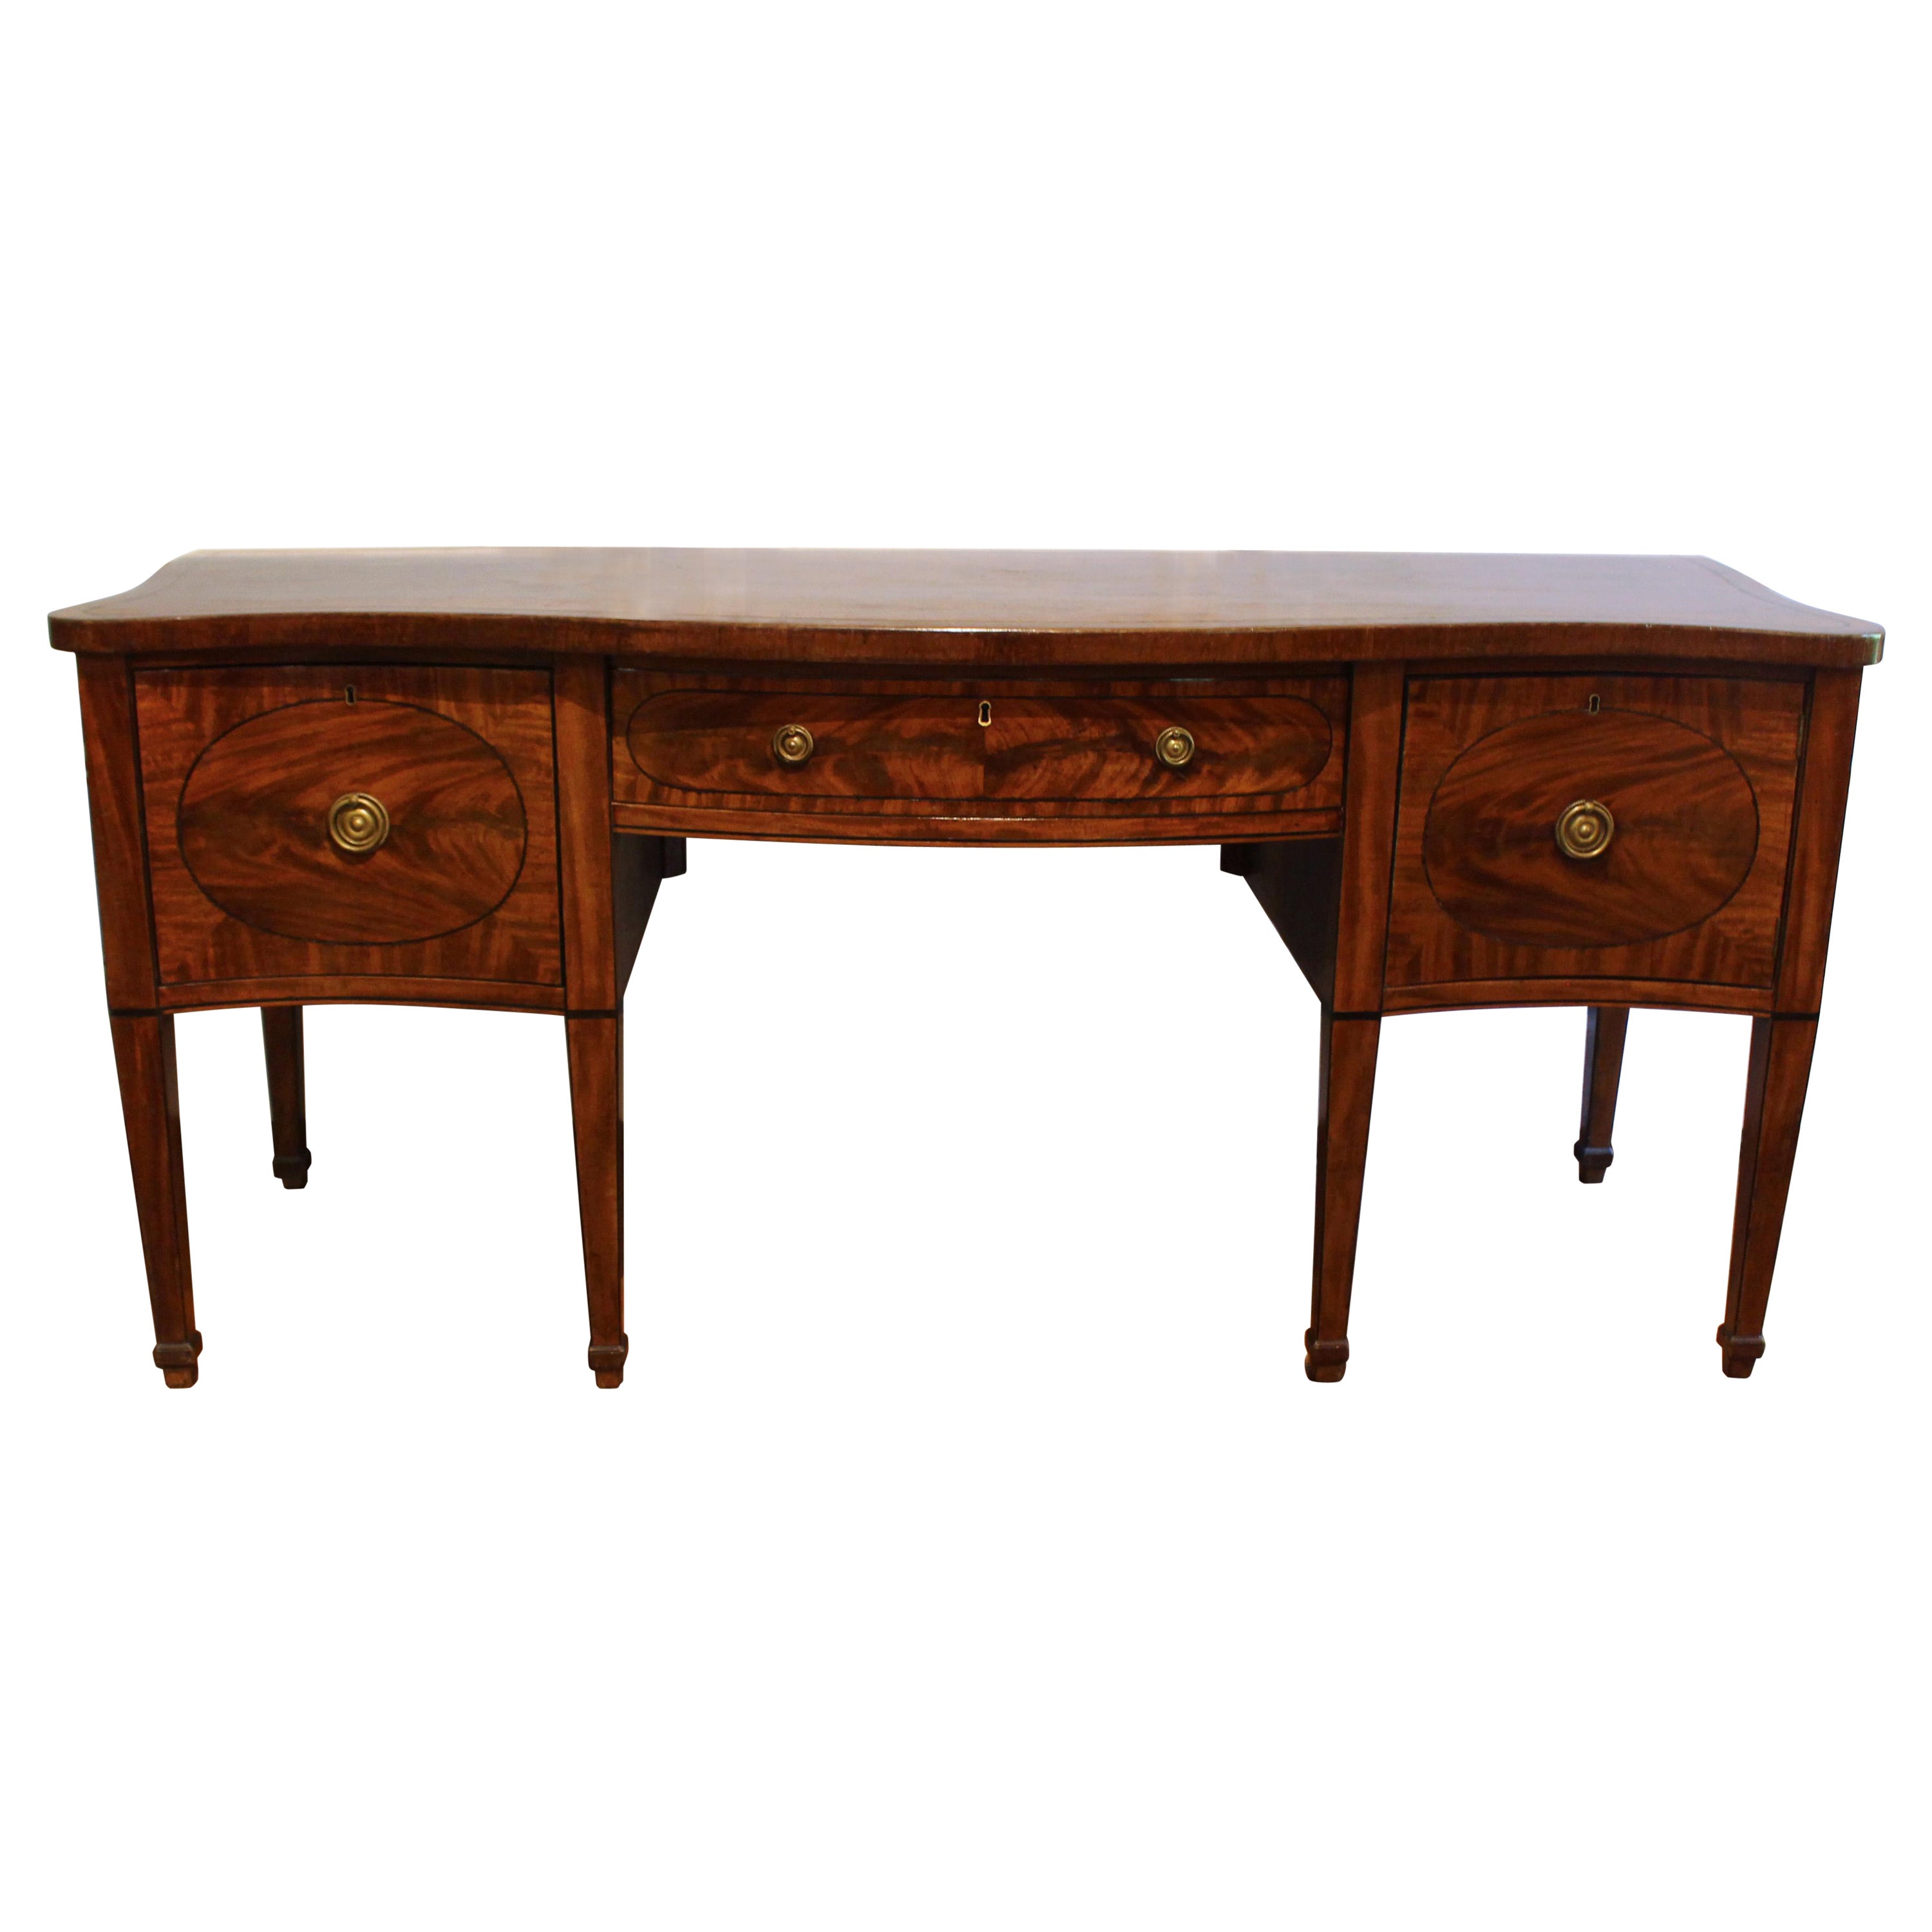 Late 18th to Early 19th Century English Serpentine Form Sideboard For Sale